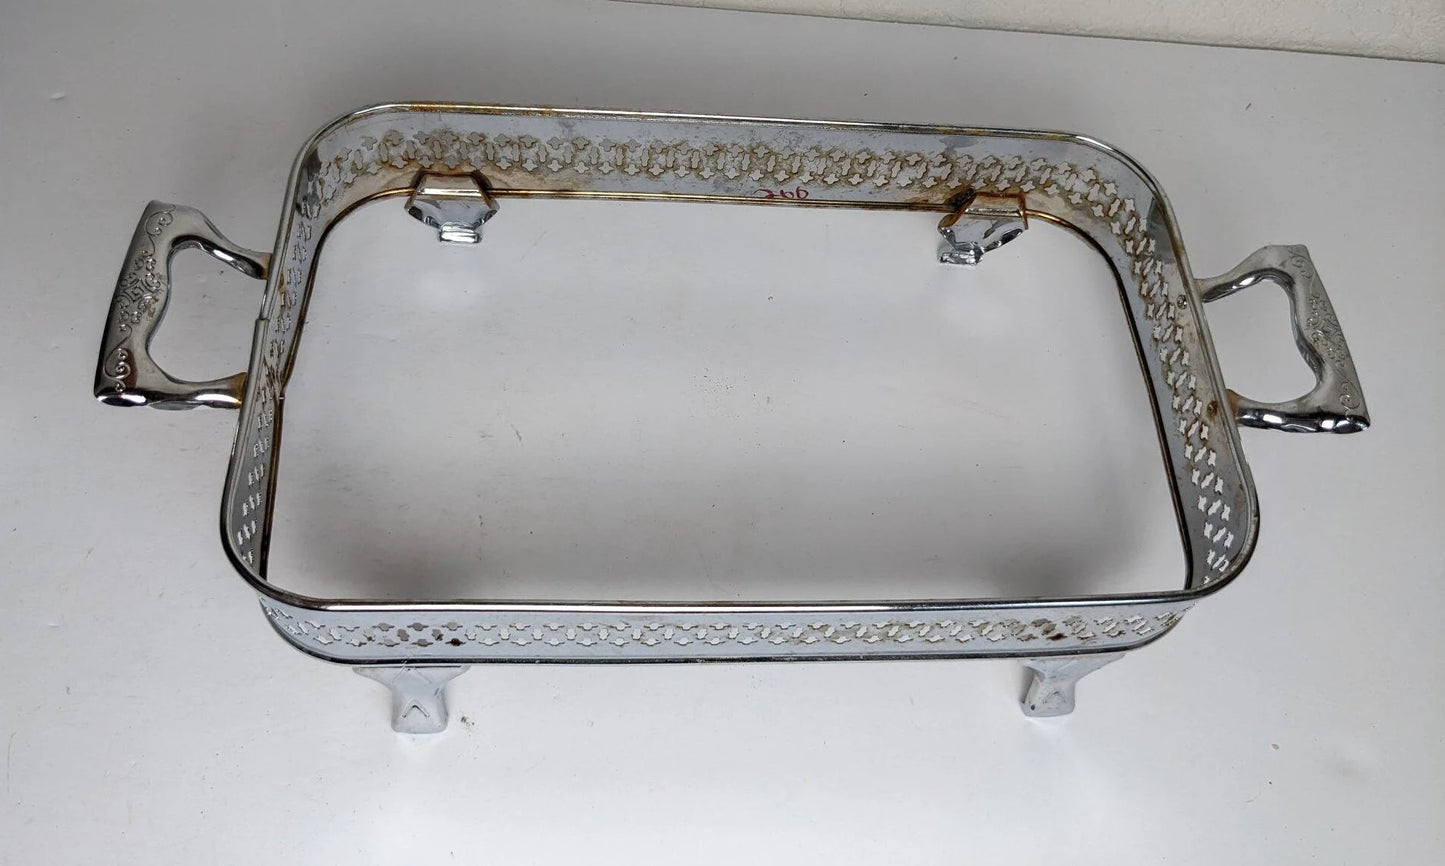 Pyrex Casserole Dish with Serving Tray